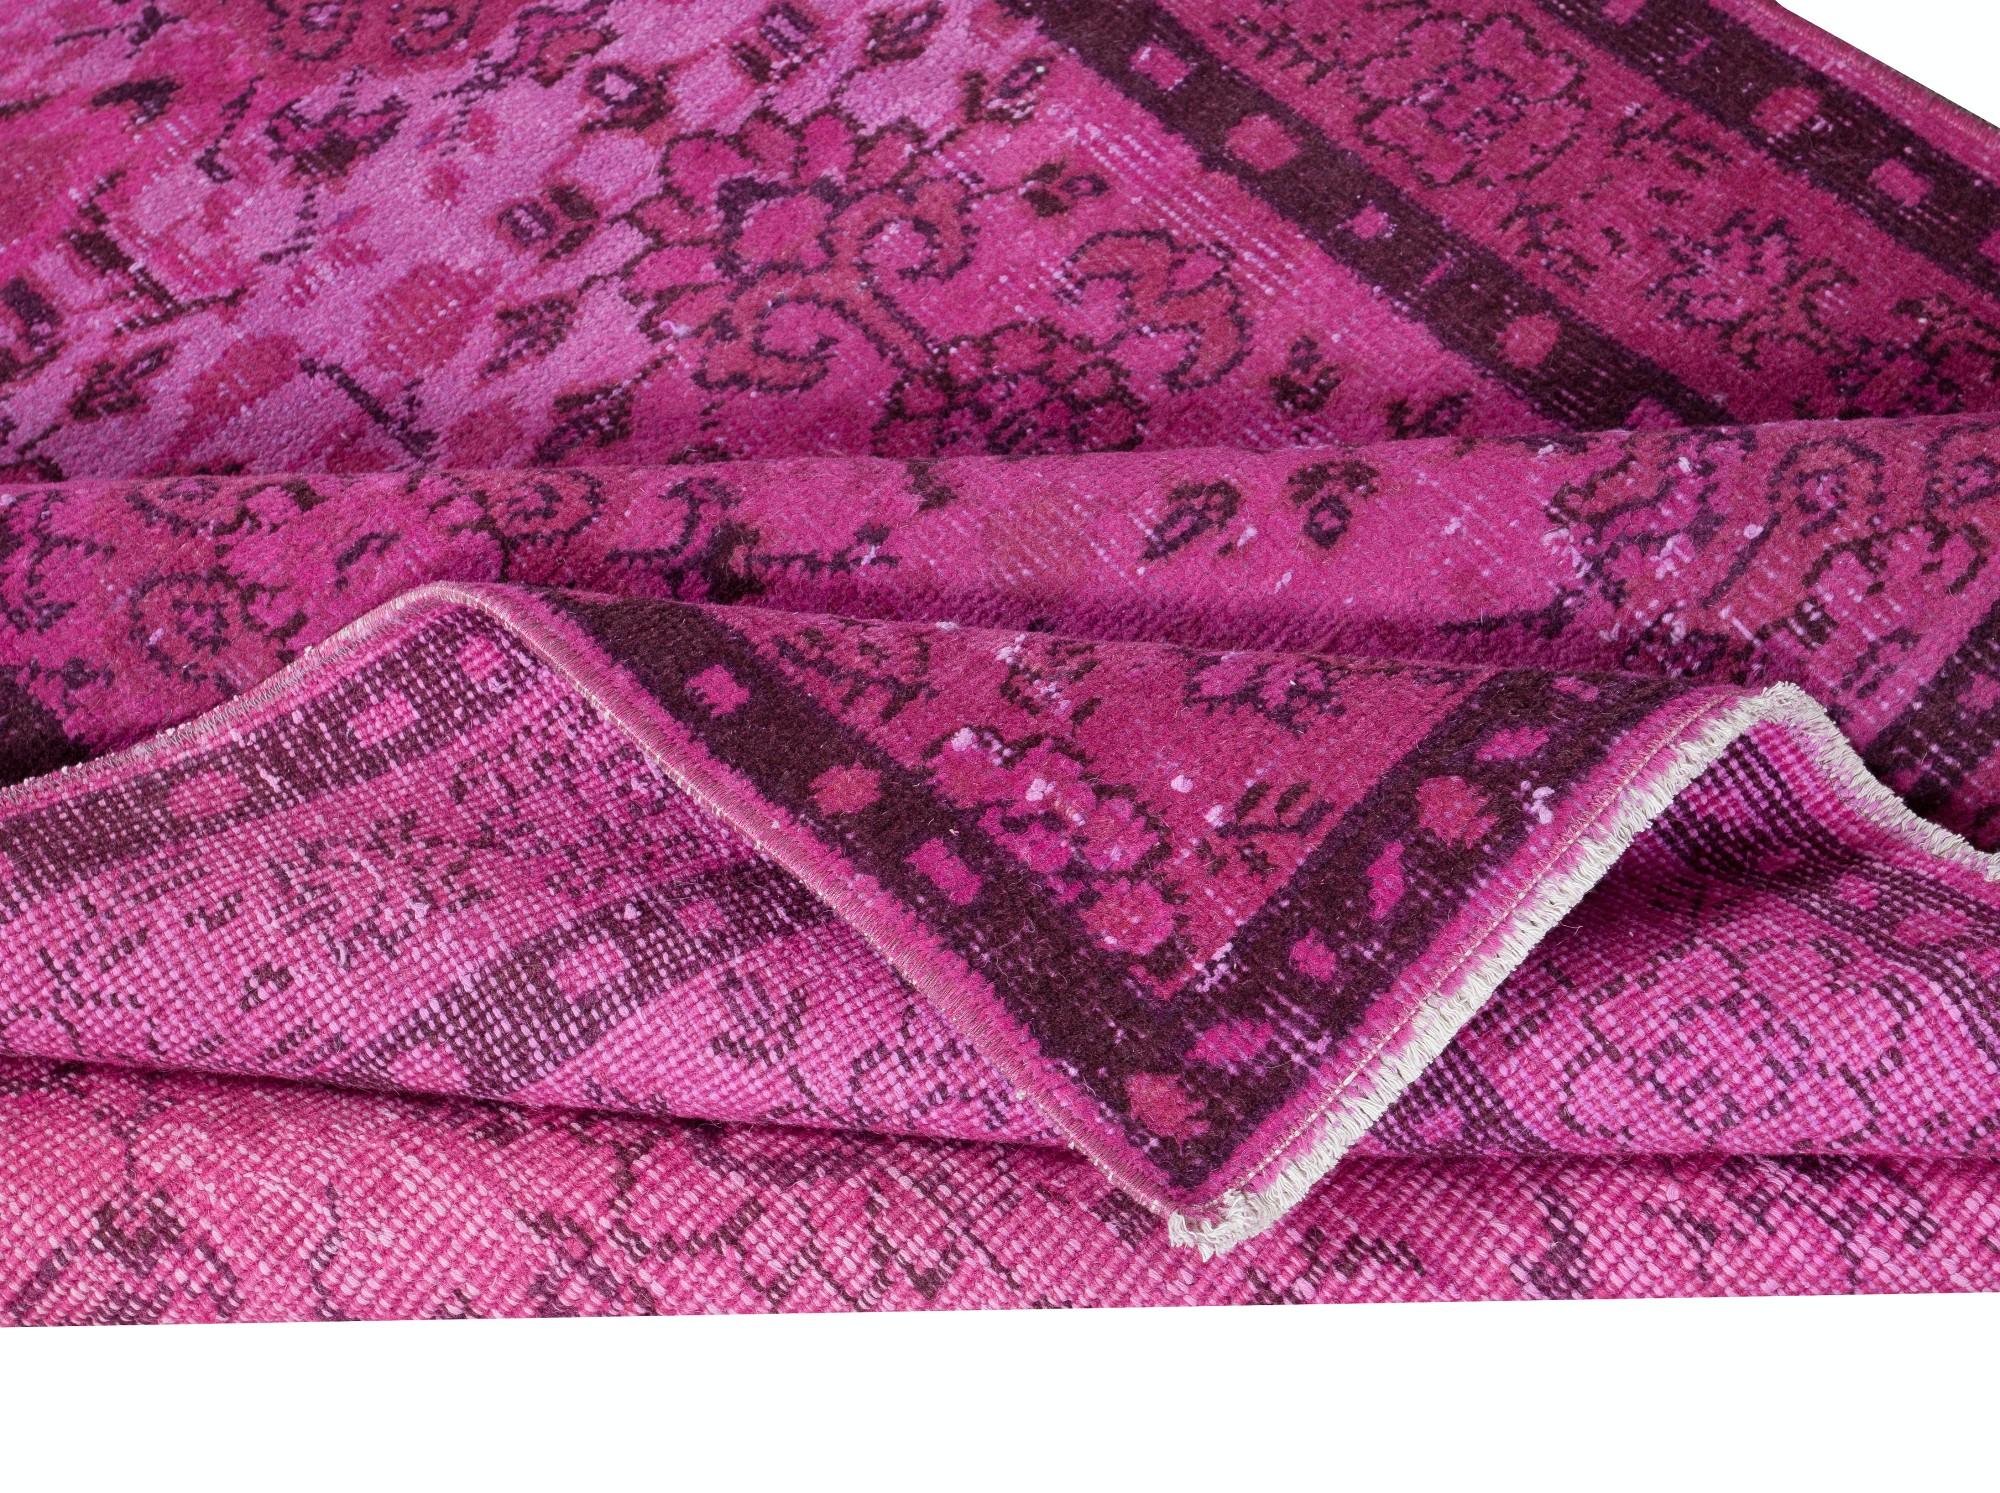 Hand-Knotted 4x7 Ft Floral Patterned Pink Rug for Modern Interiors, Handknotted in Turkey For Sale